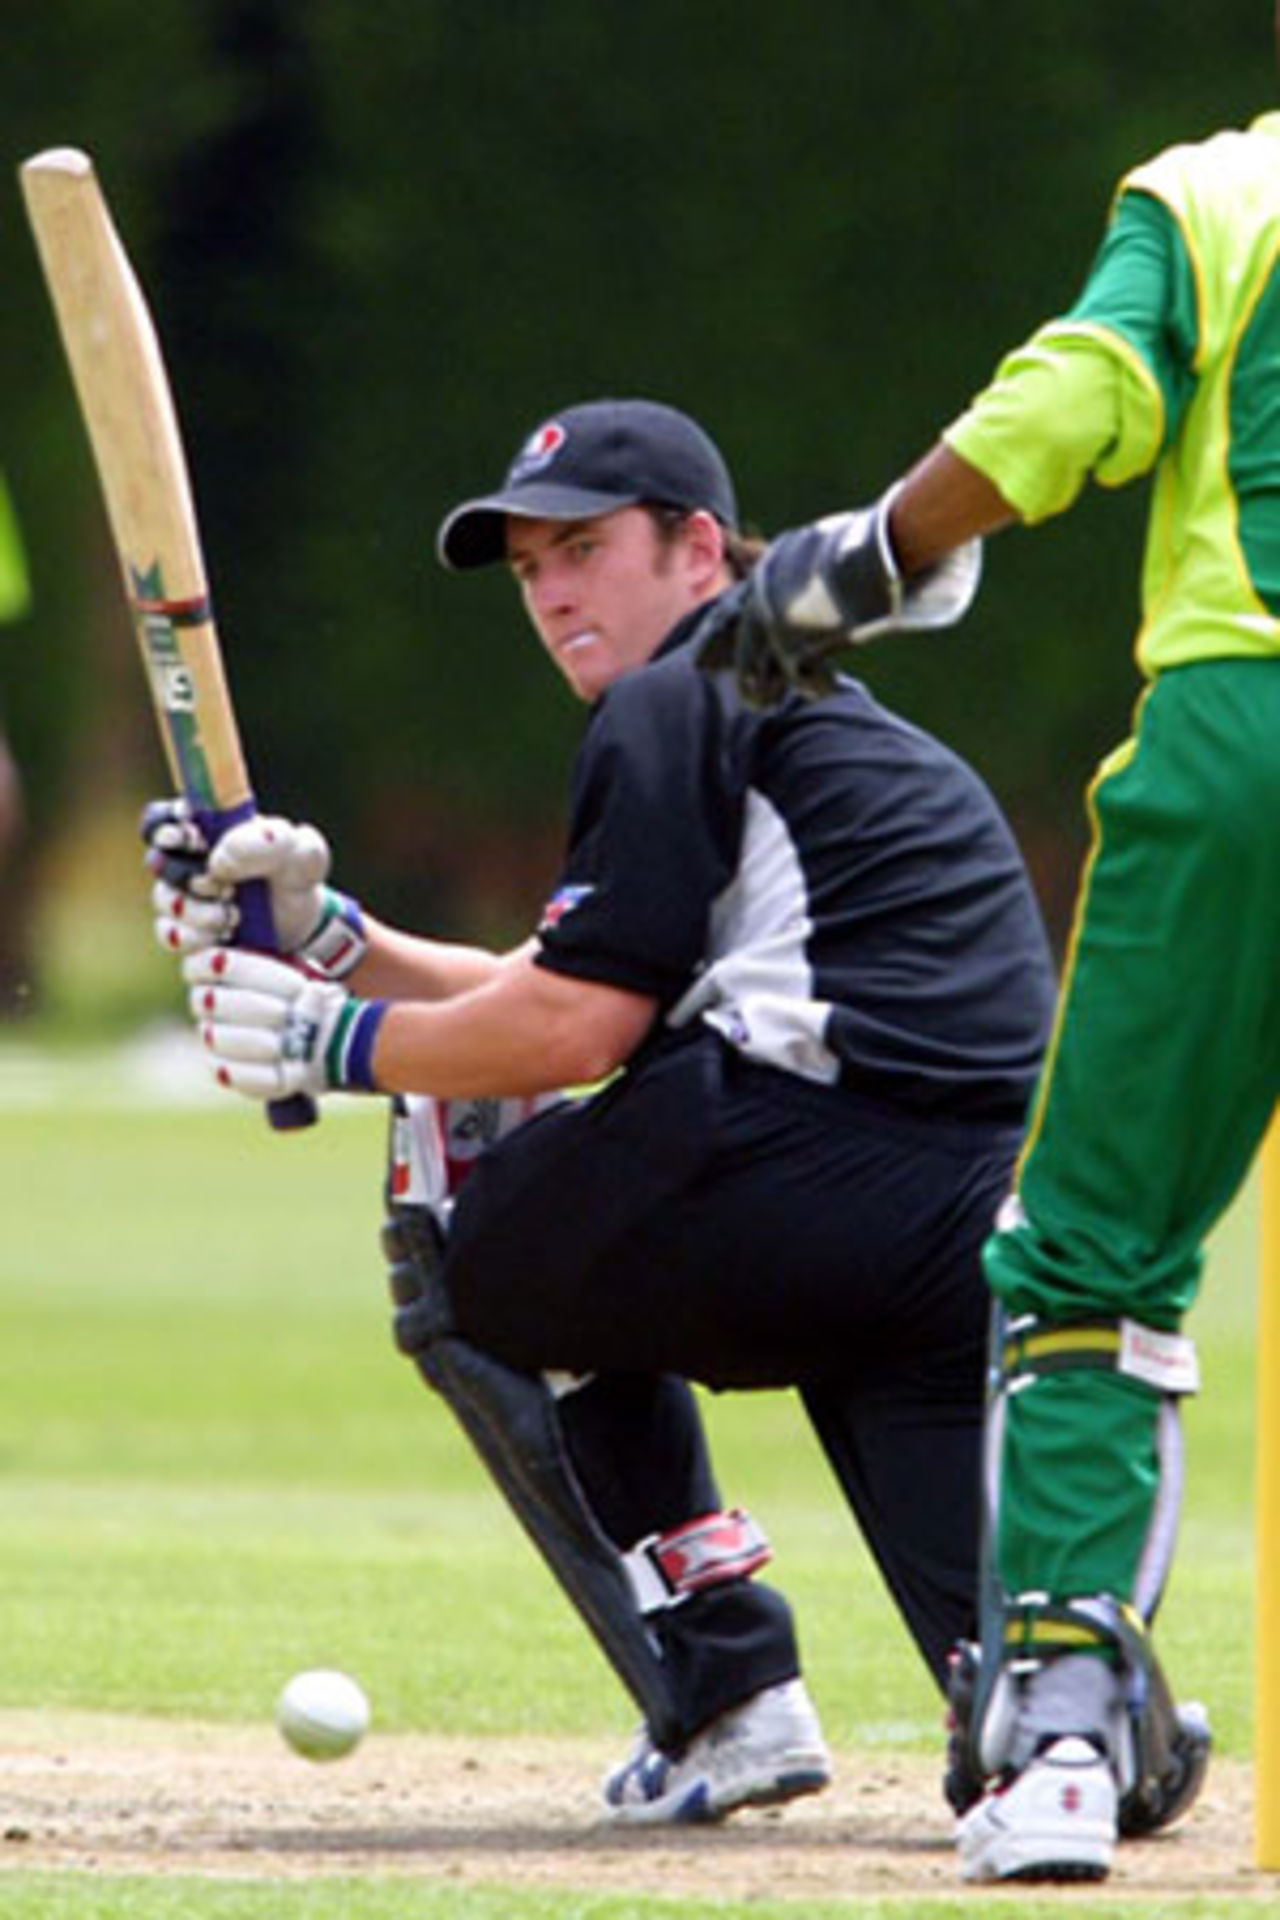 New Zealand Under-19 batsman Neil Broom sweeps a delivery during his innings of three. ICC Under-19 World Cup Warmup: New Zealand Under-19s v Pakistan Under-19s at Lincoln No. 3, Lincoln, 17 January 2002.